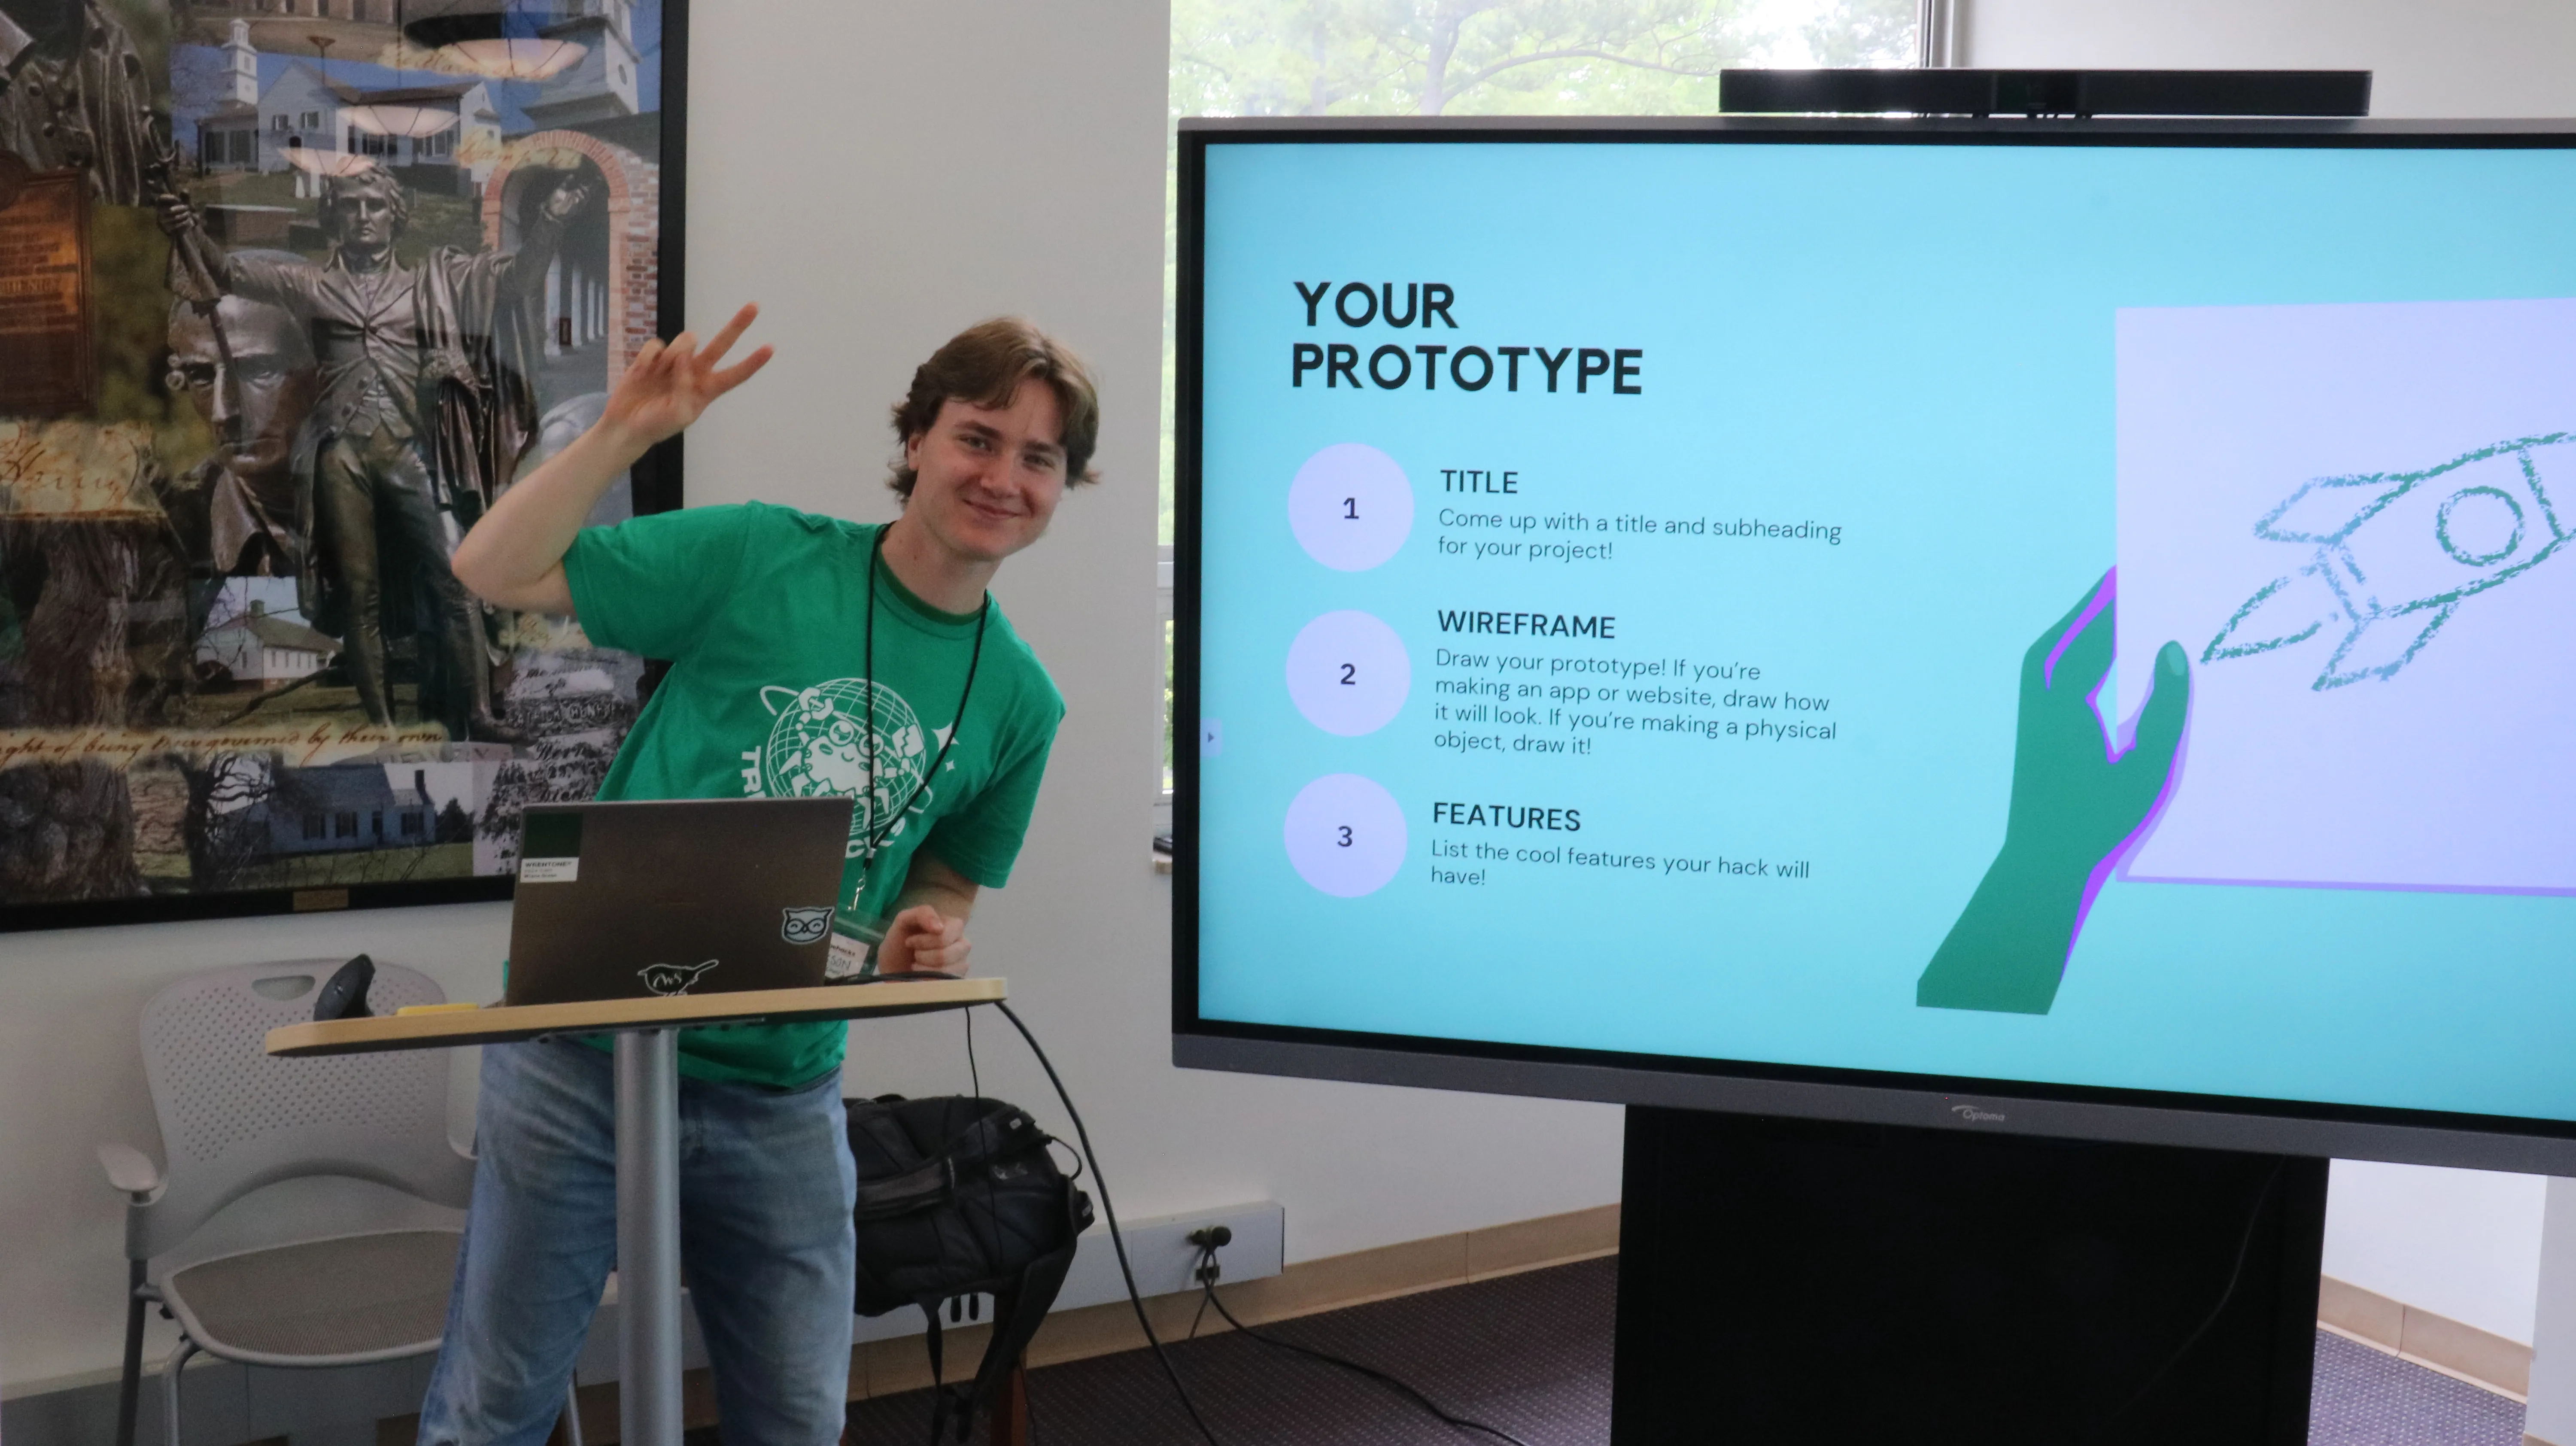 A person leaning to the side, holding up two fingers in a peace sign. They are standing in front of a whiteboard that says 'Your Prototype'